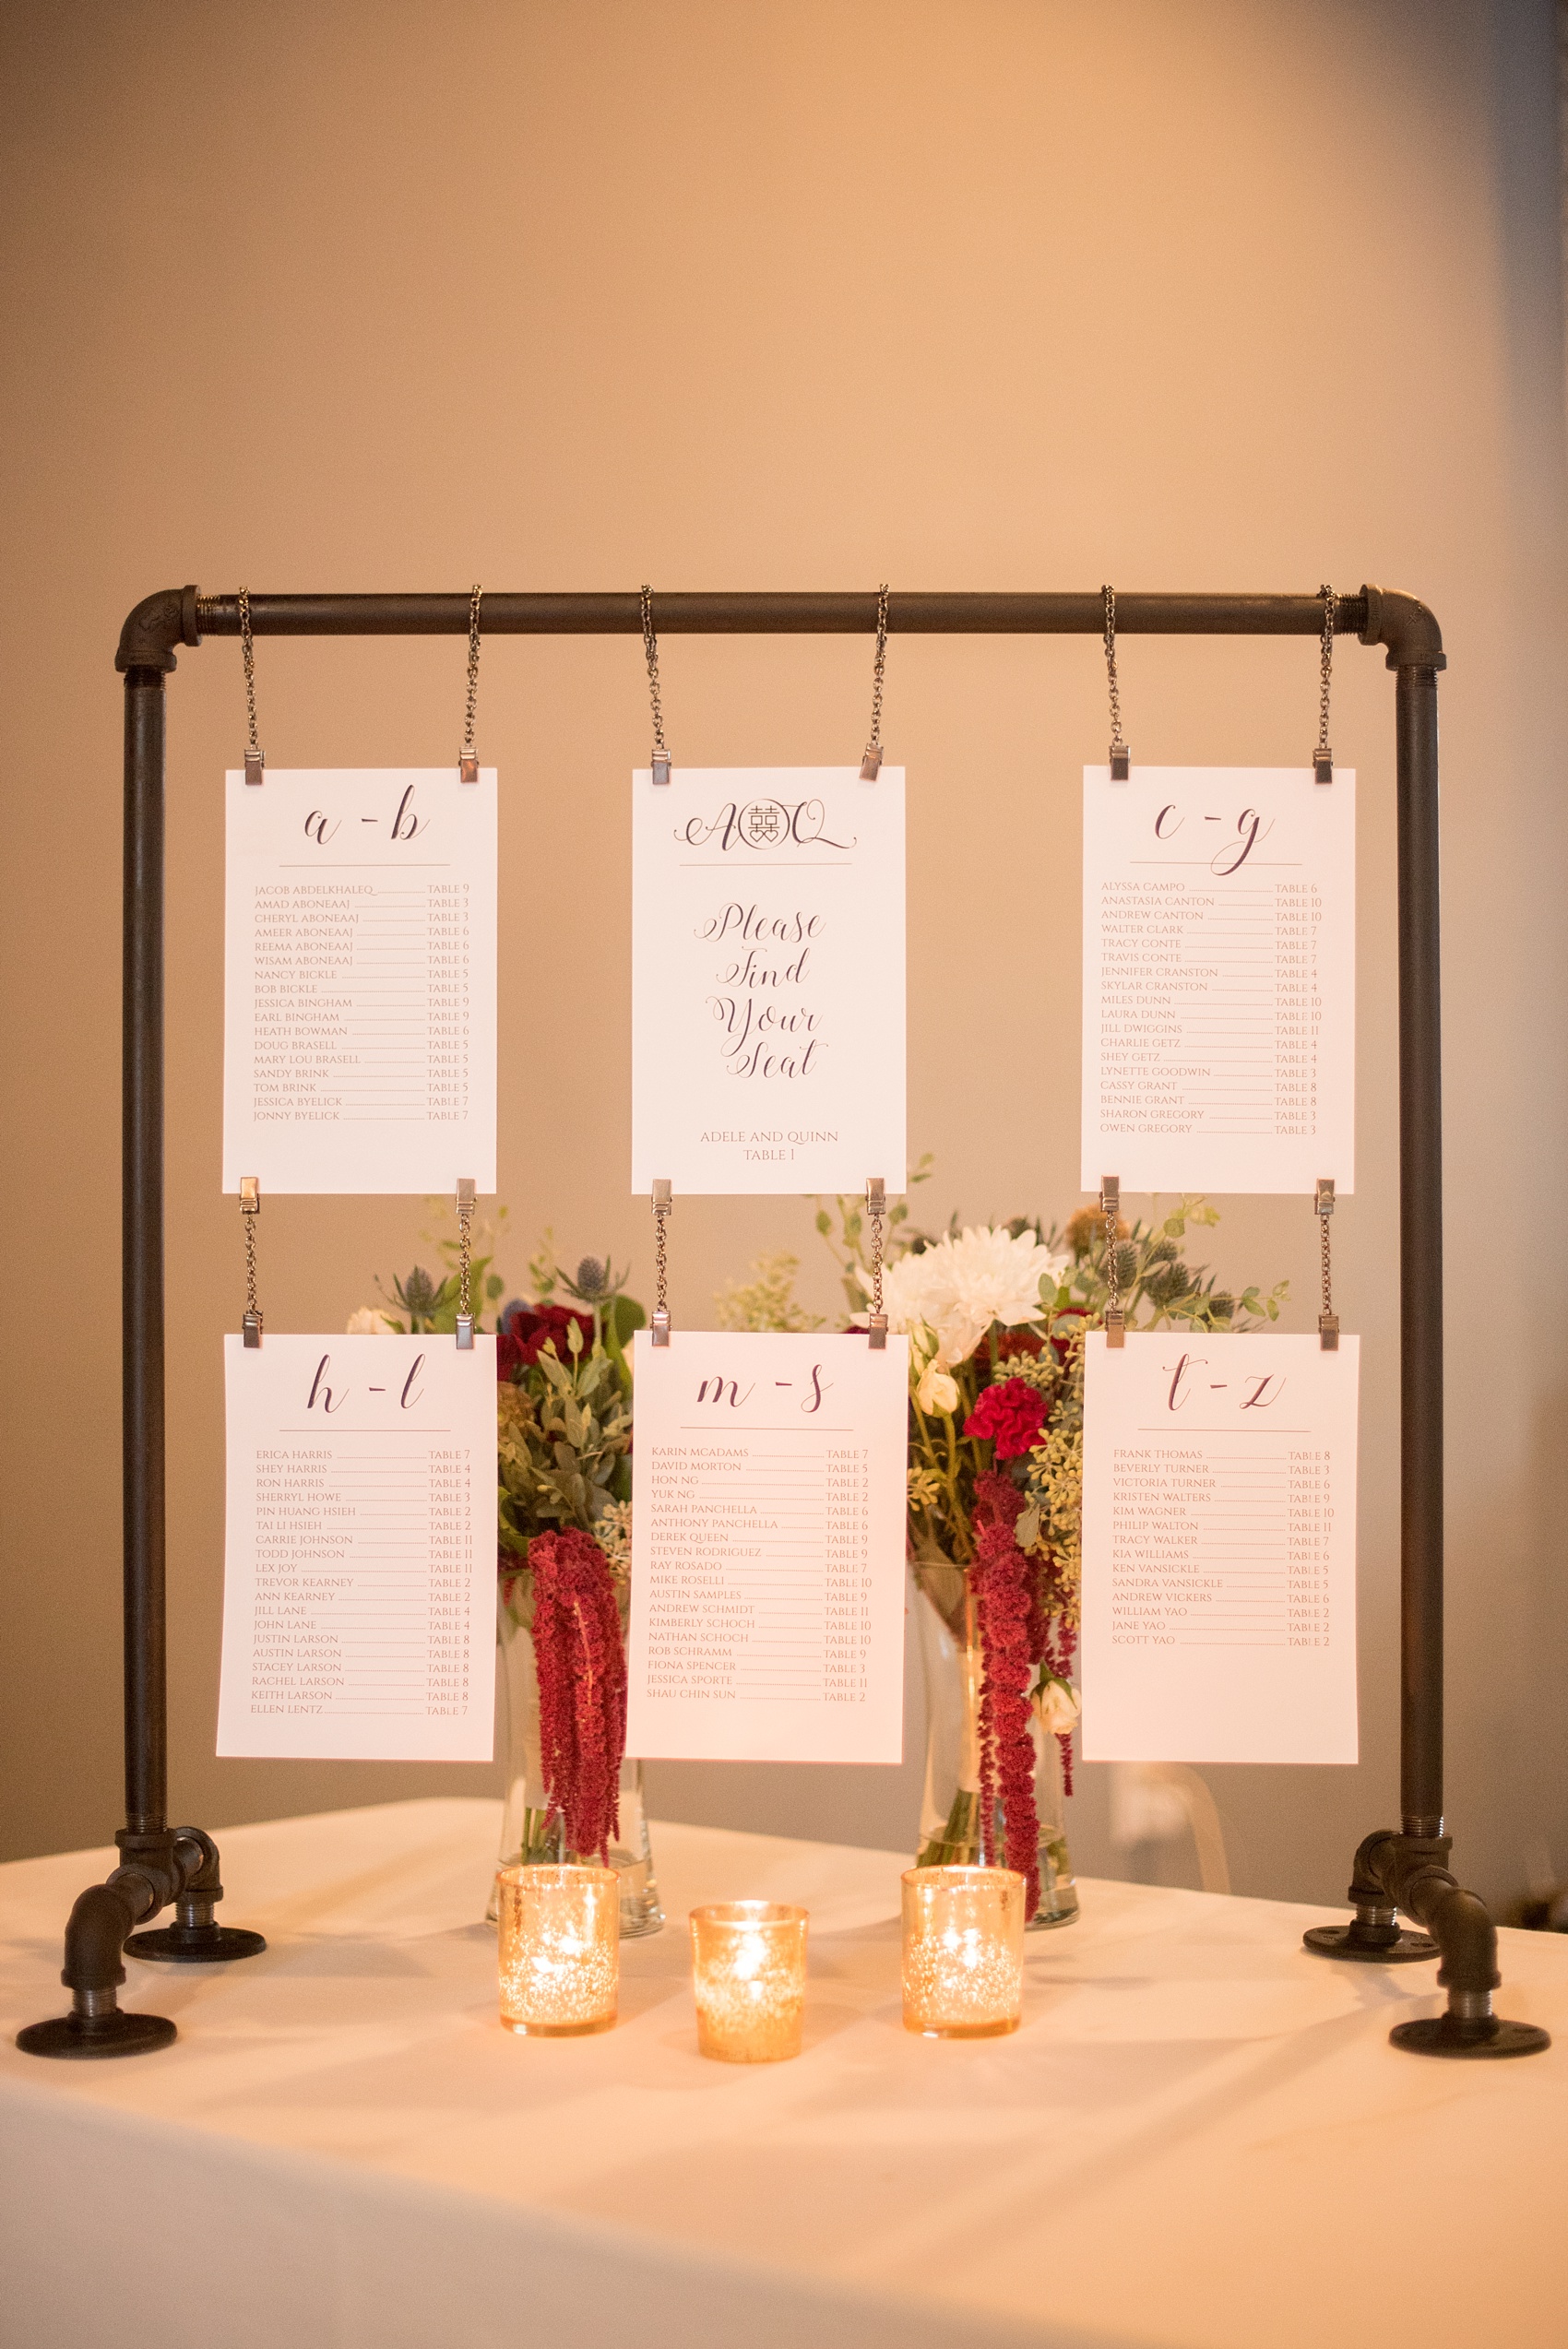 Mikkel Paige Photography photos from a wedding at 214 Martin Street in downtown Raleigh with a unique escort card detail sign.